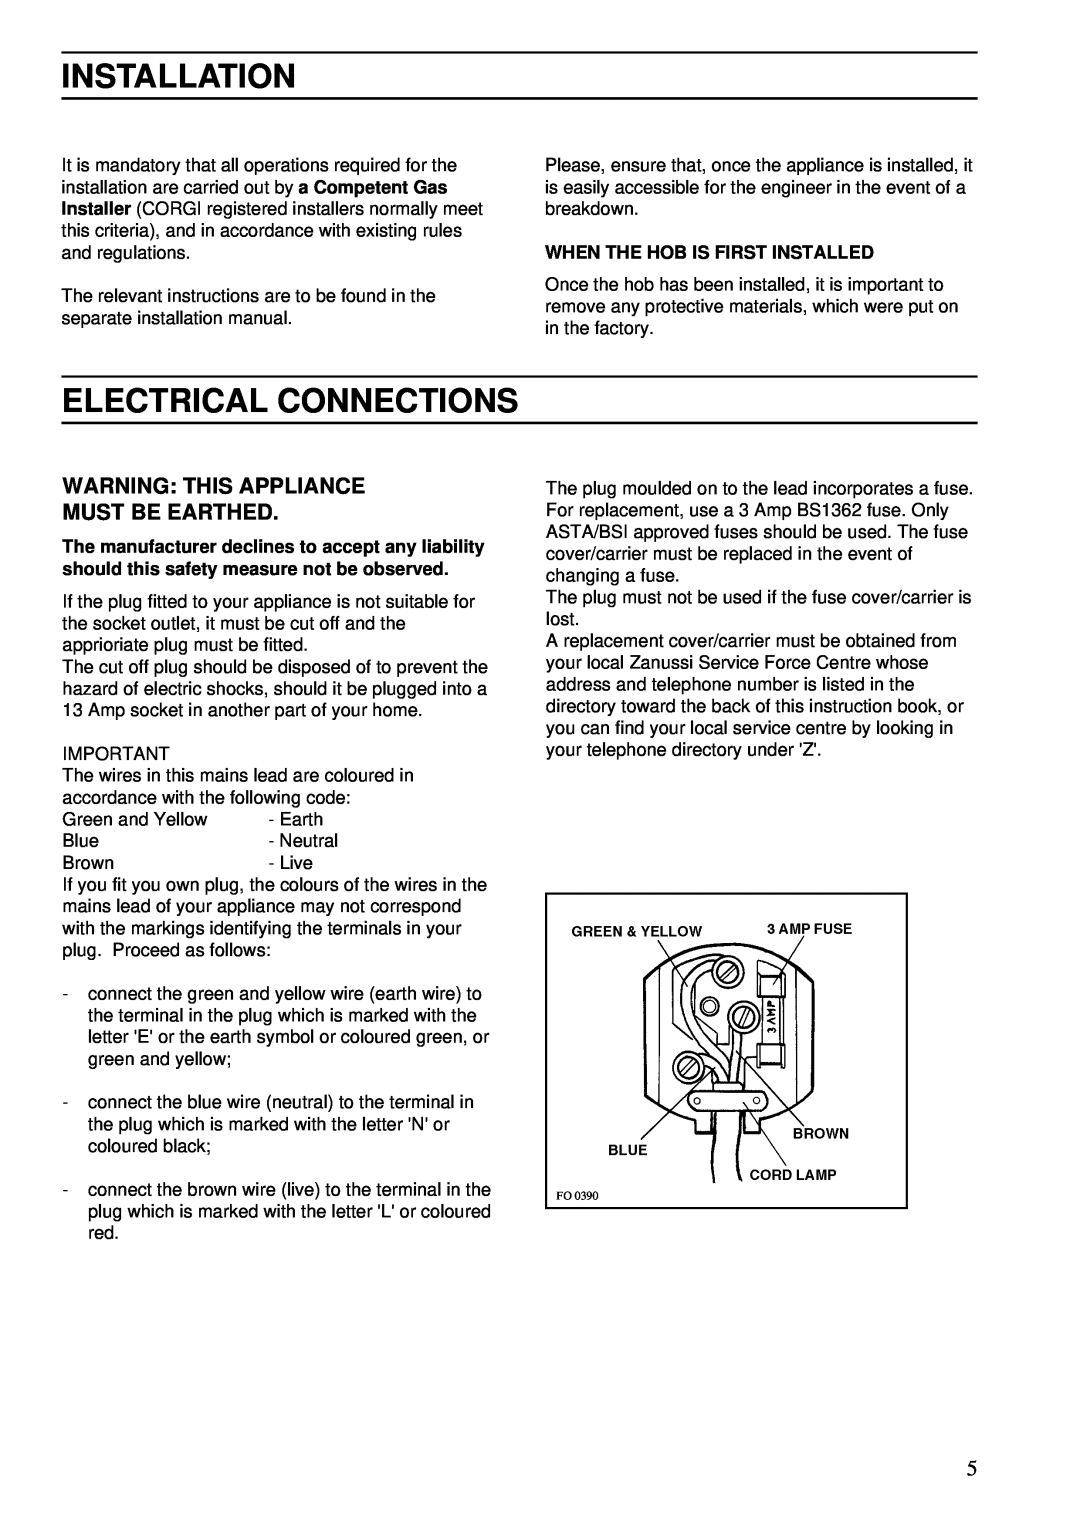 Zanussi ZBG 503 C, ZBG 501 B, ZGA 75 W manual Installation, Electrical Connections, Warning This Appliance Must Be Earthed 